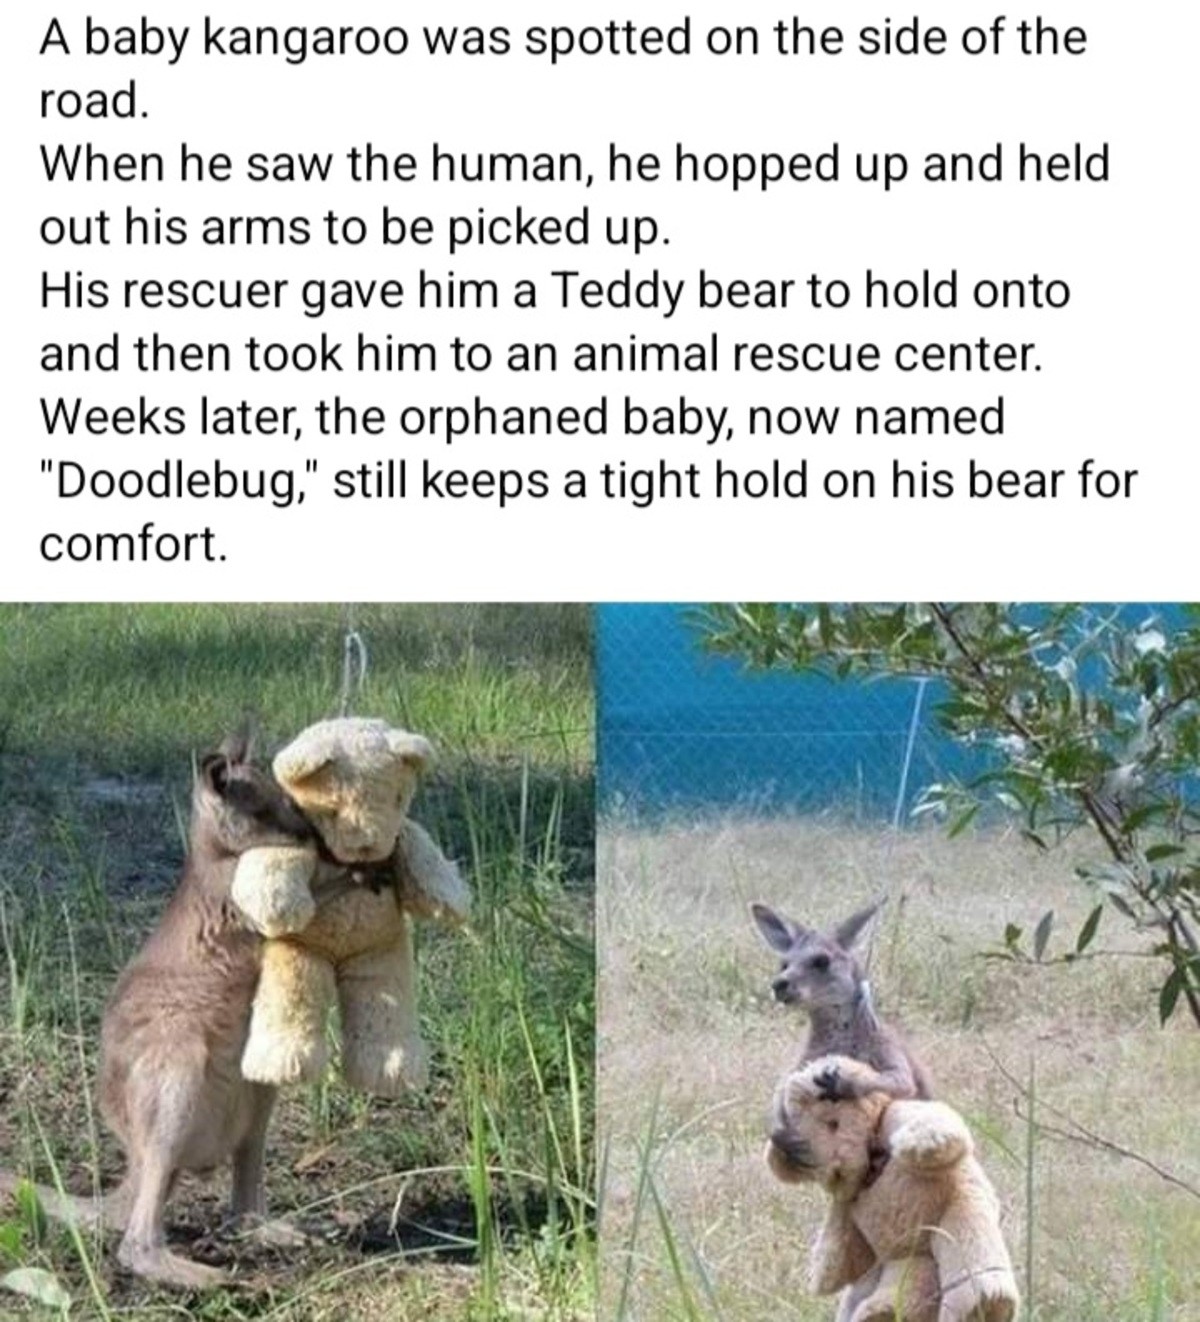 bolstered Louse. .. Kangaroos are neat animals, they're super cute and cuddly, until they ain't. They go from living teddy bear, to pcp addled welterweight, in the blink of an eye.